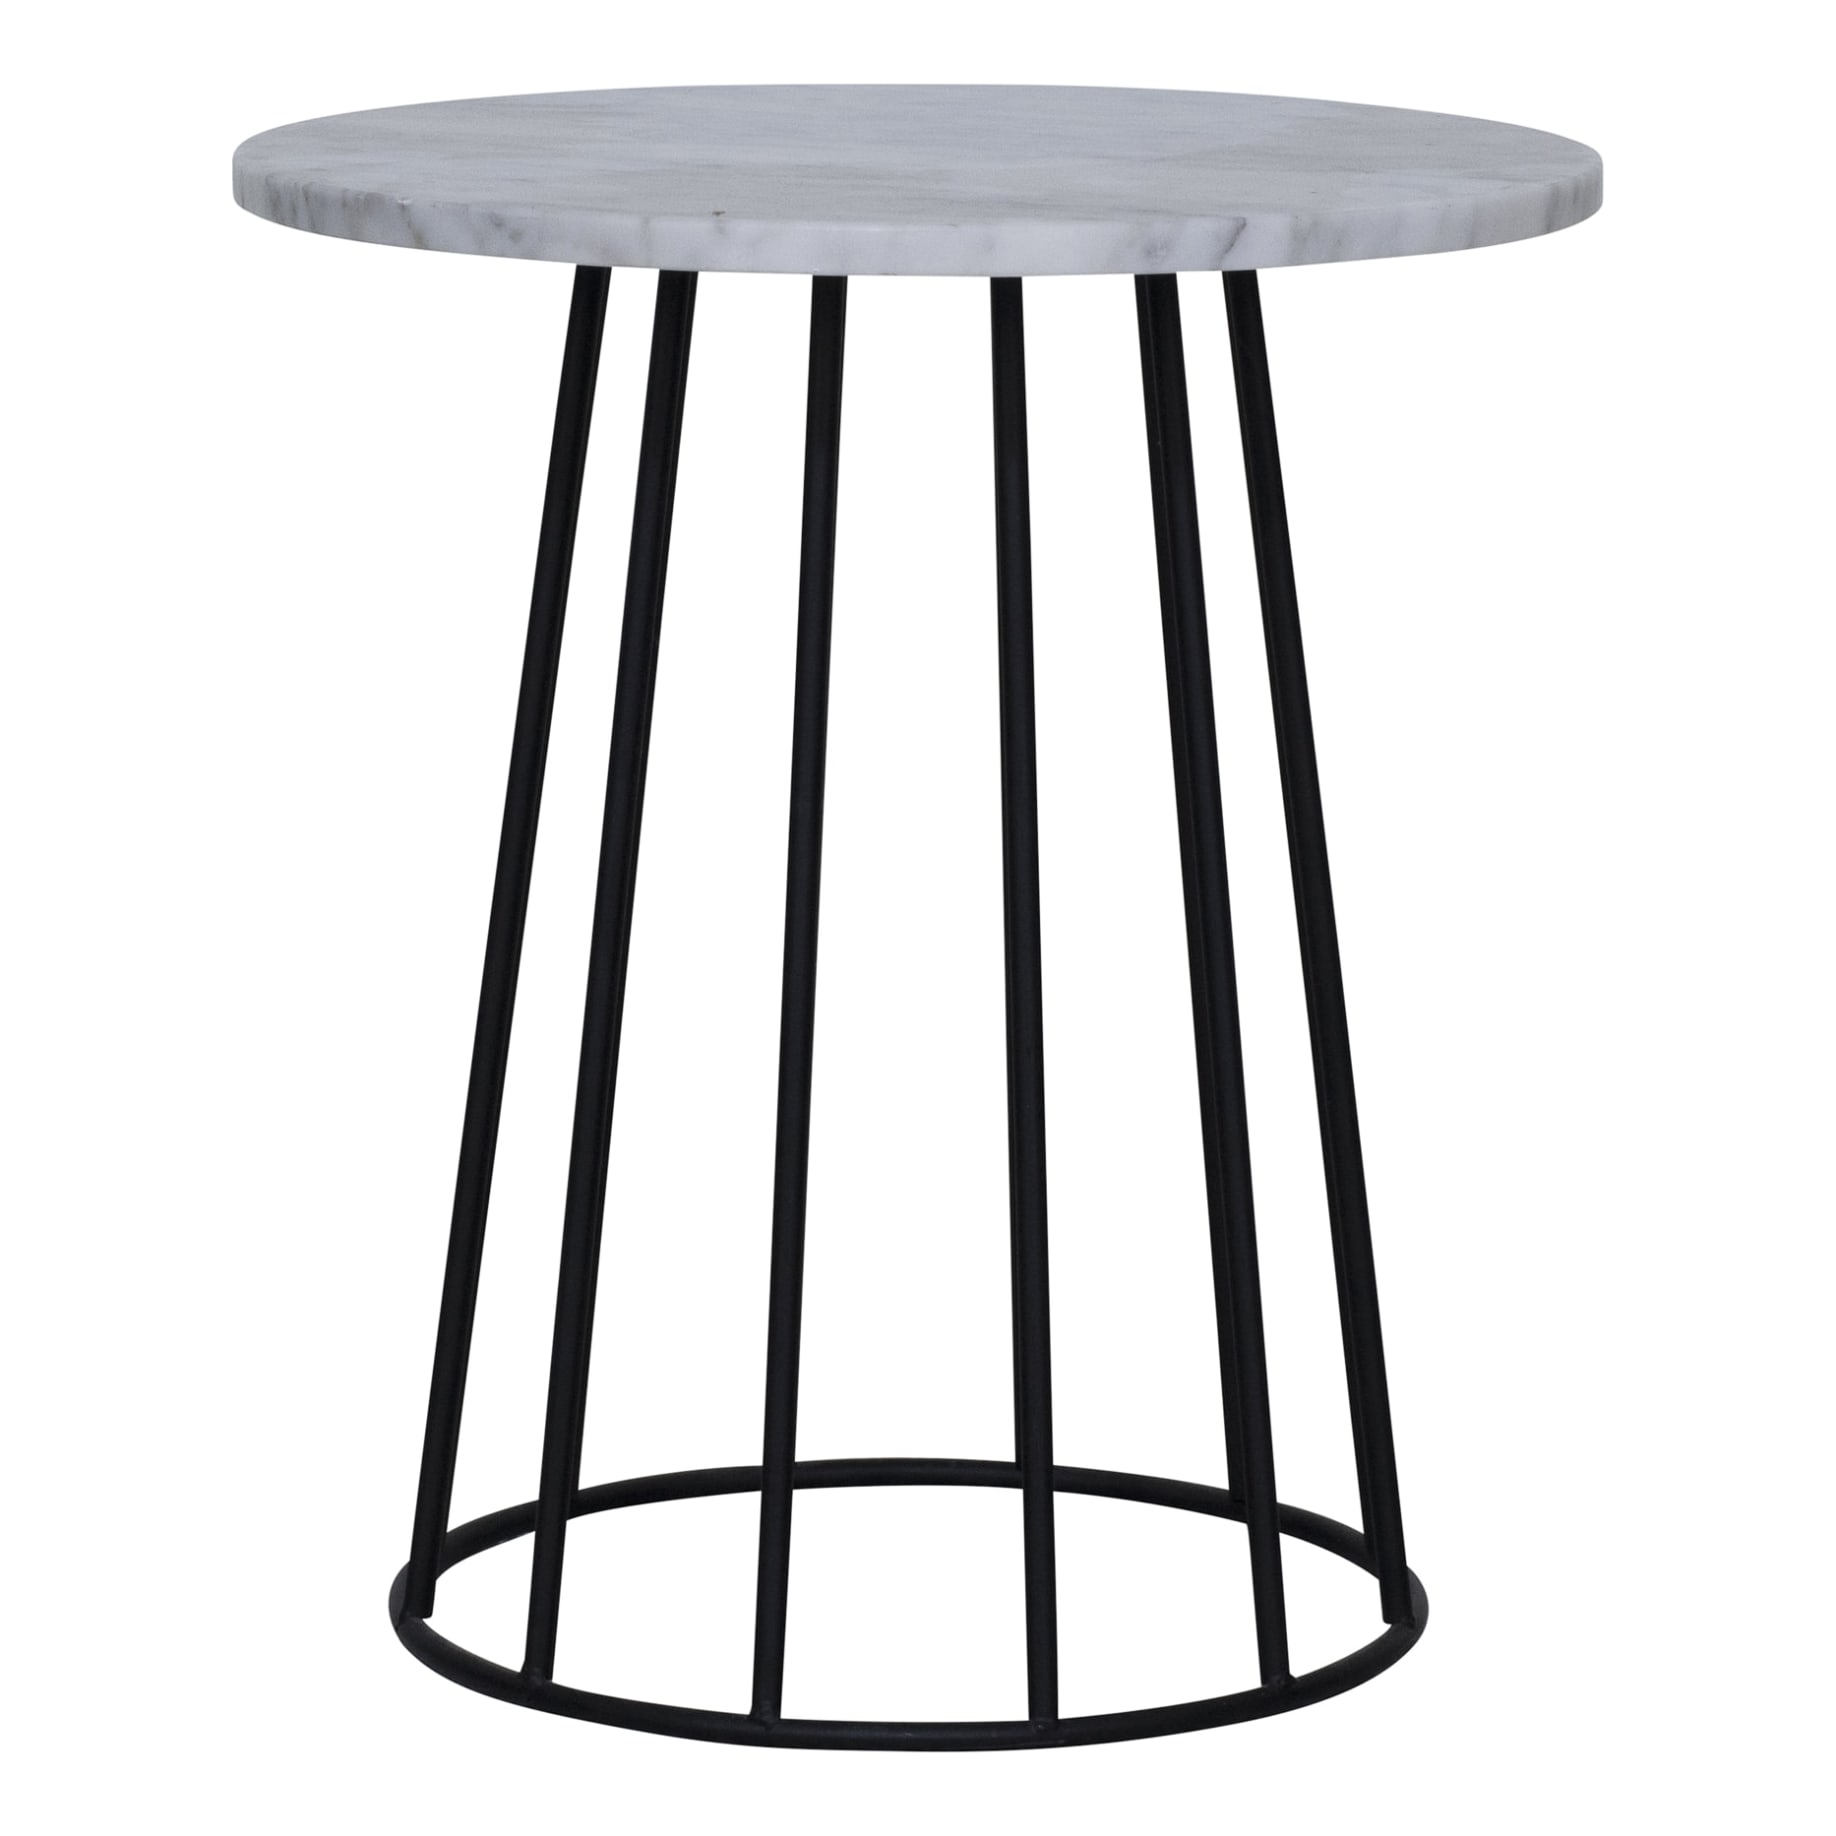 Trenton Round Low Side Table 40 x 44cm in White Marble